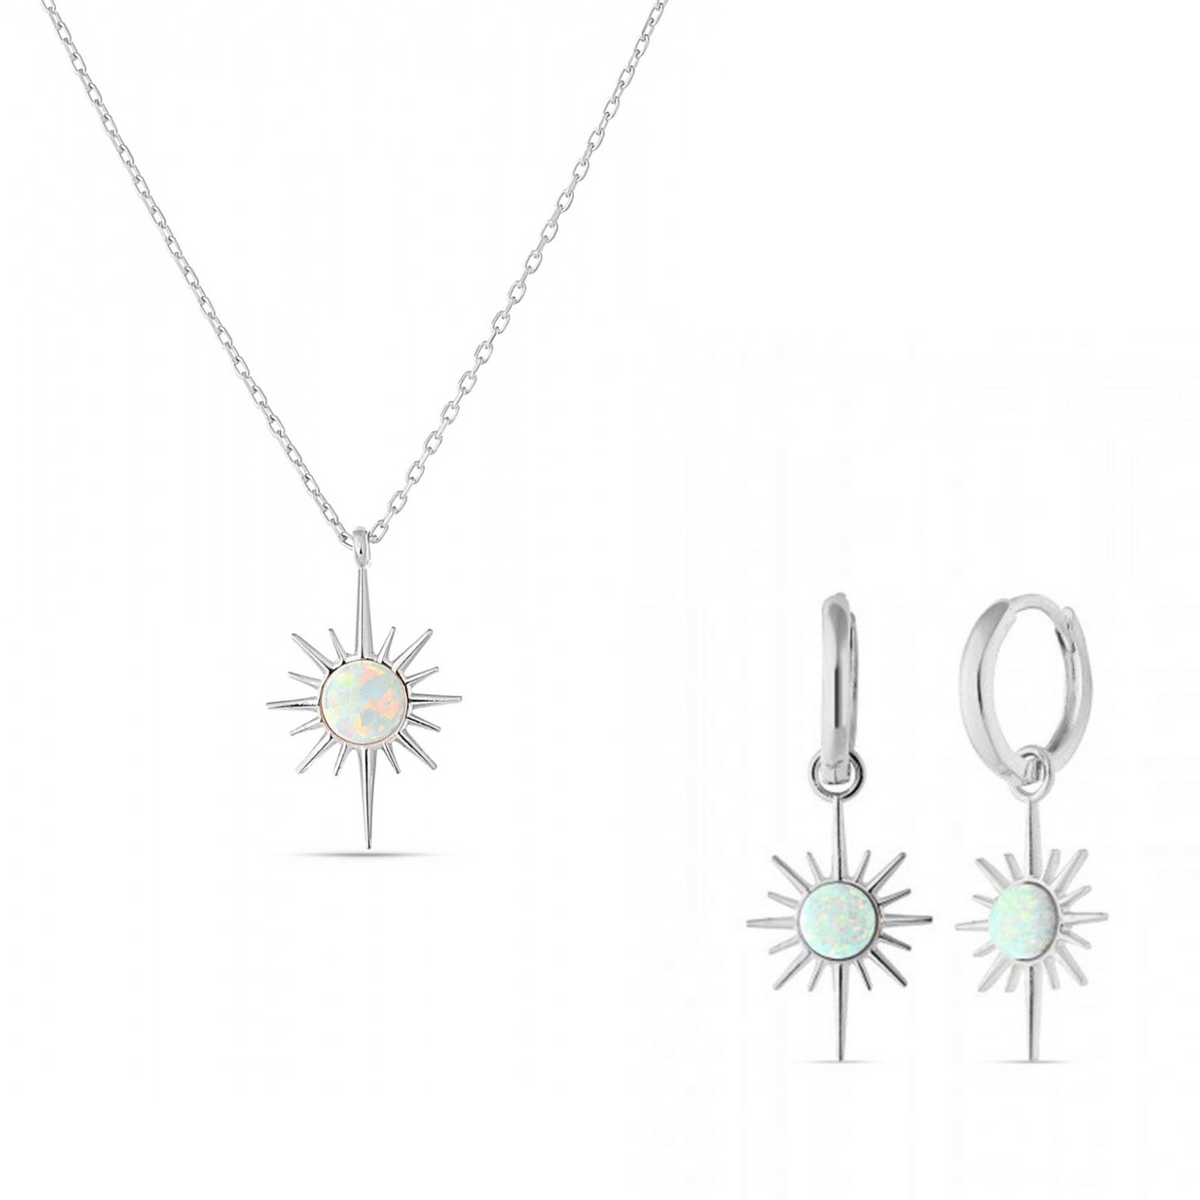 White Opal Northernstar Sterling Silver Pendant Necklace and Earring Set